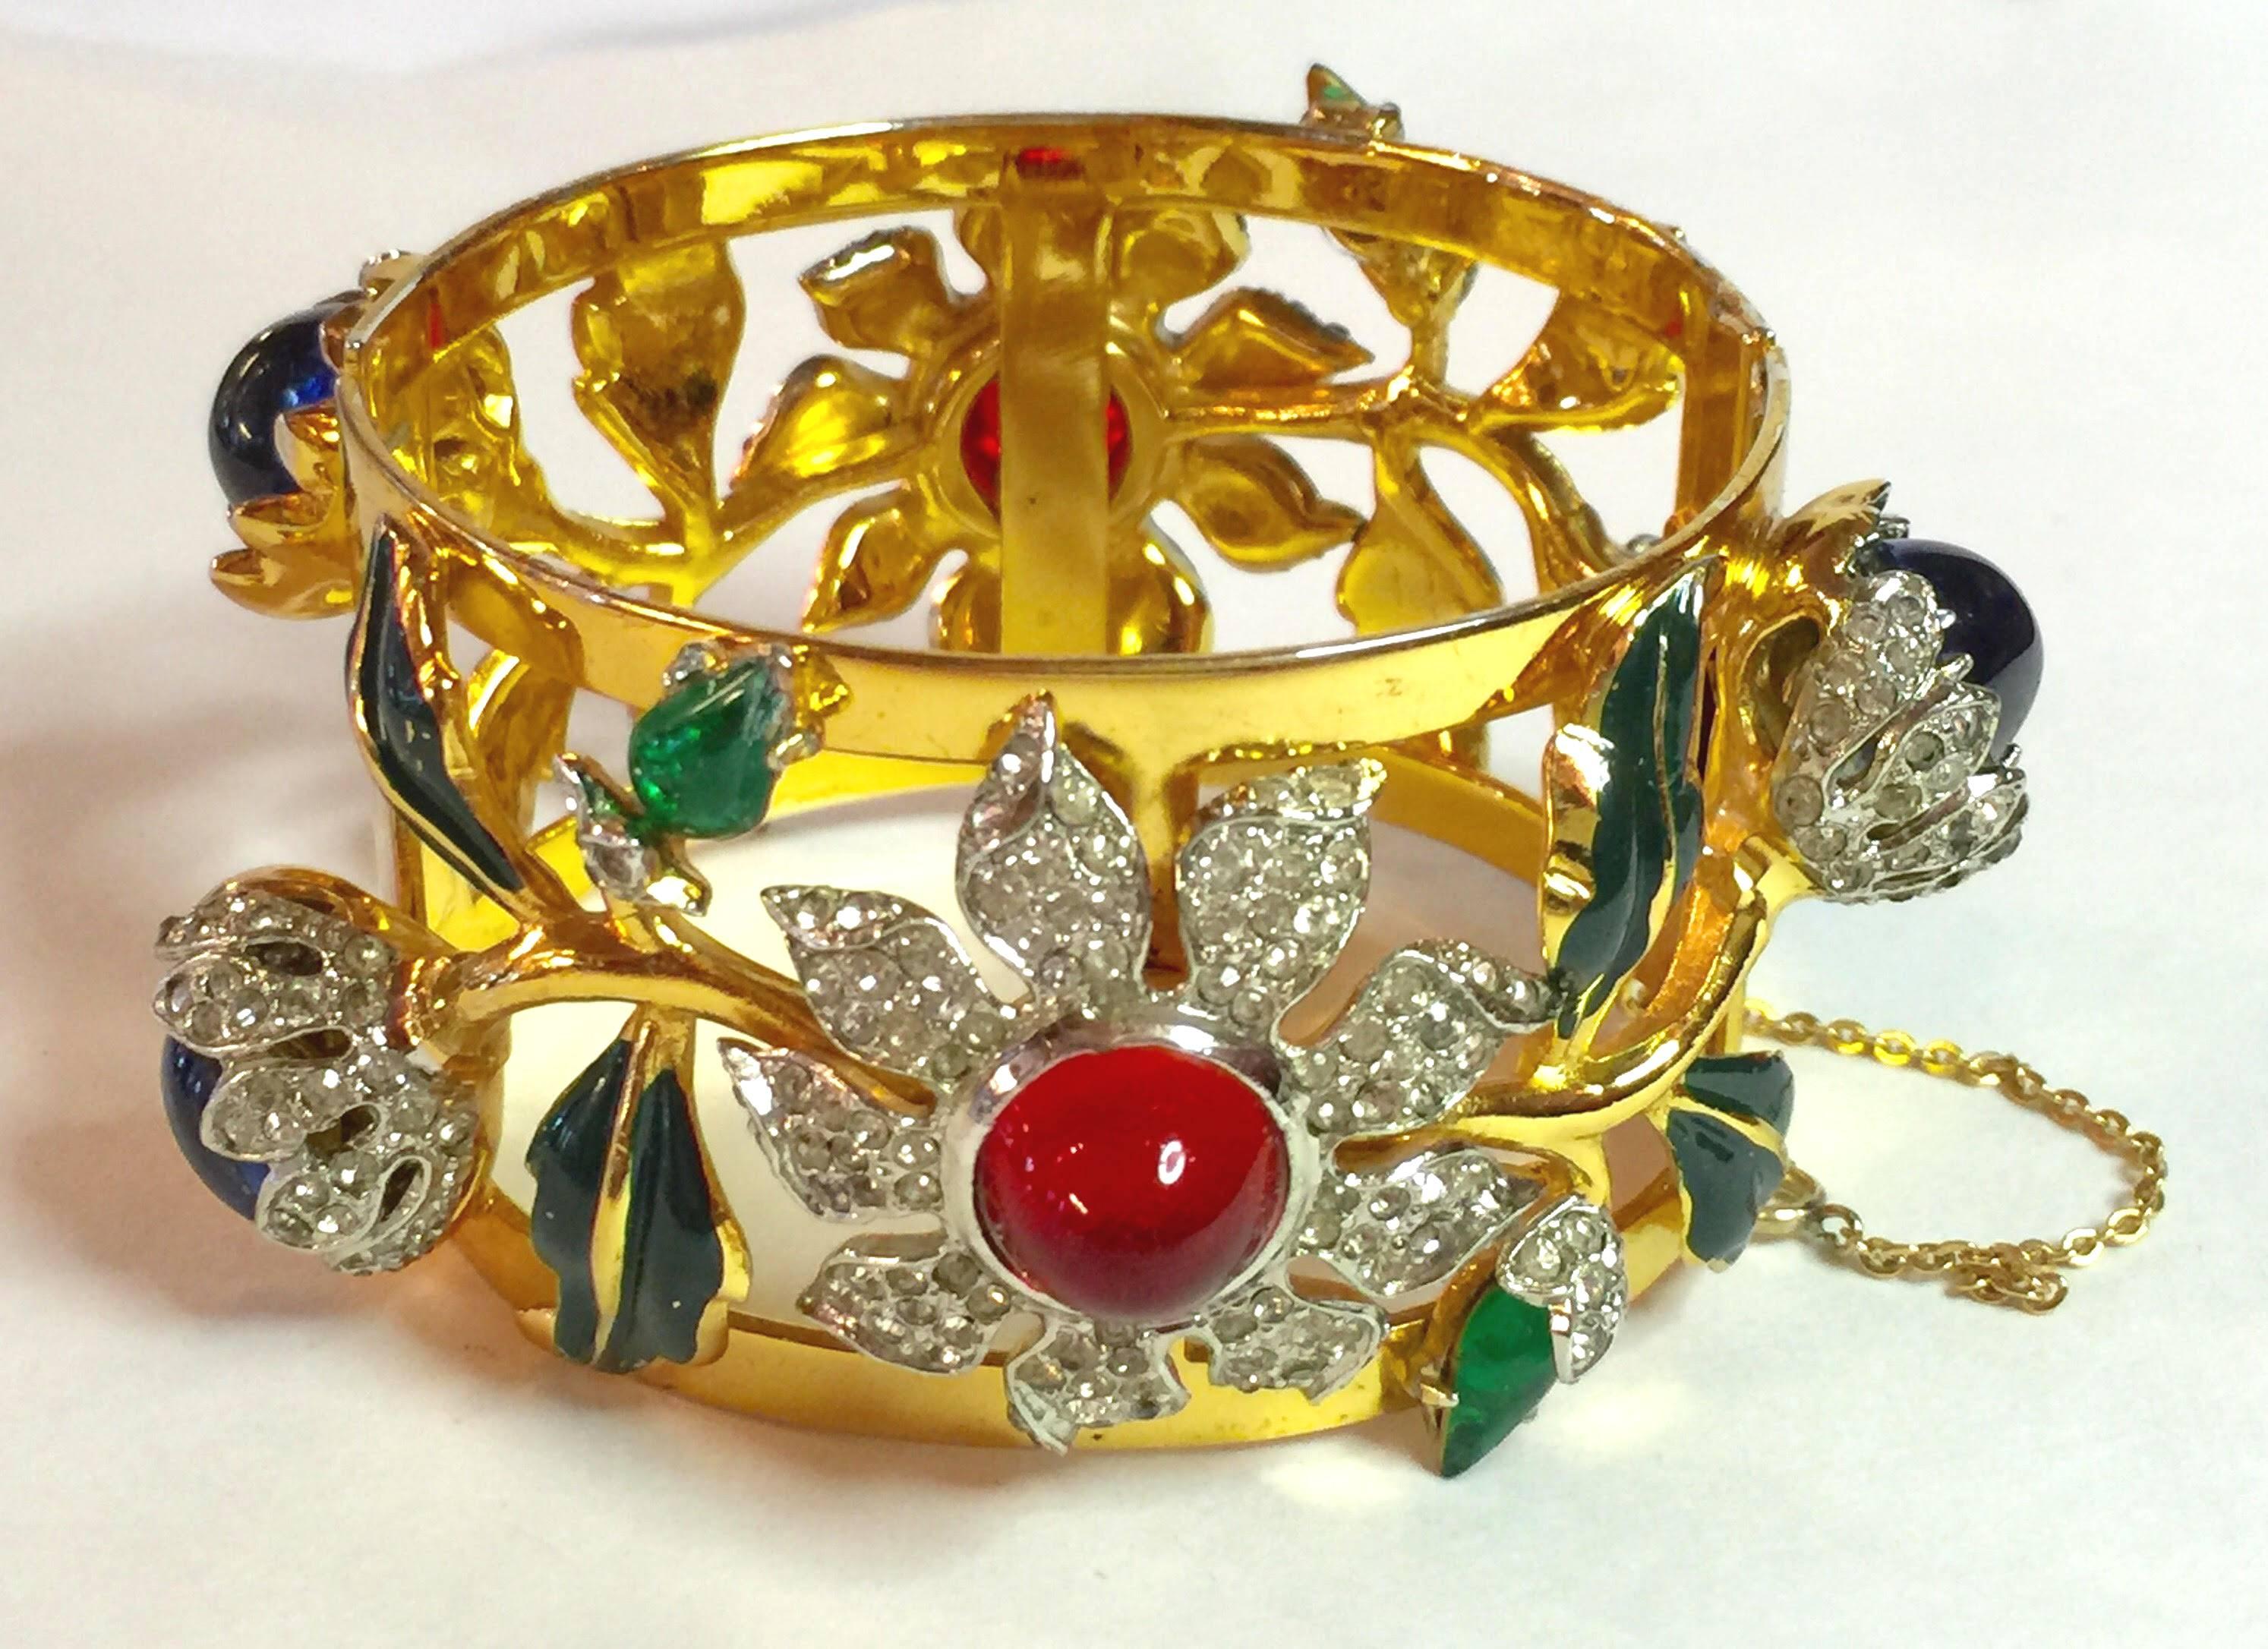 Gloriously gilt, this CoroCraft Sterling Carmen Miranda Bracelet with Diamante and Gem Tone Cabochons is among the most iconic of all 1940s retro vintage costume jewelry designs ever created. Over 2.5  inches wide with a tongue and groove clasp,